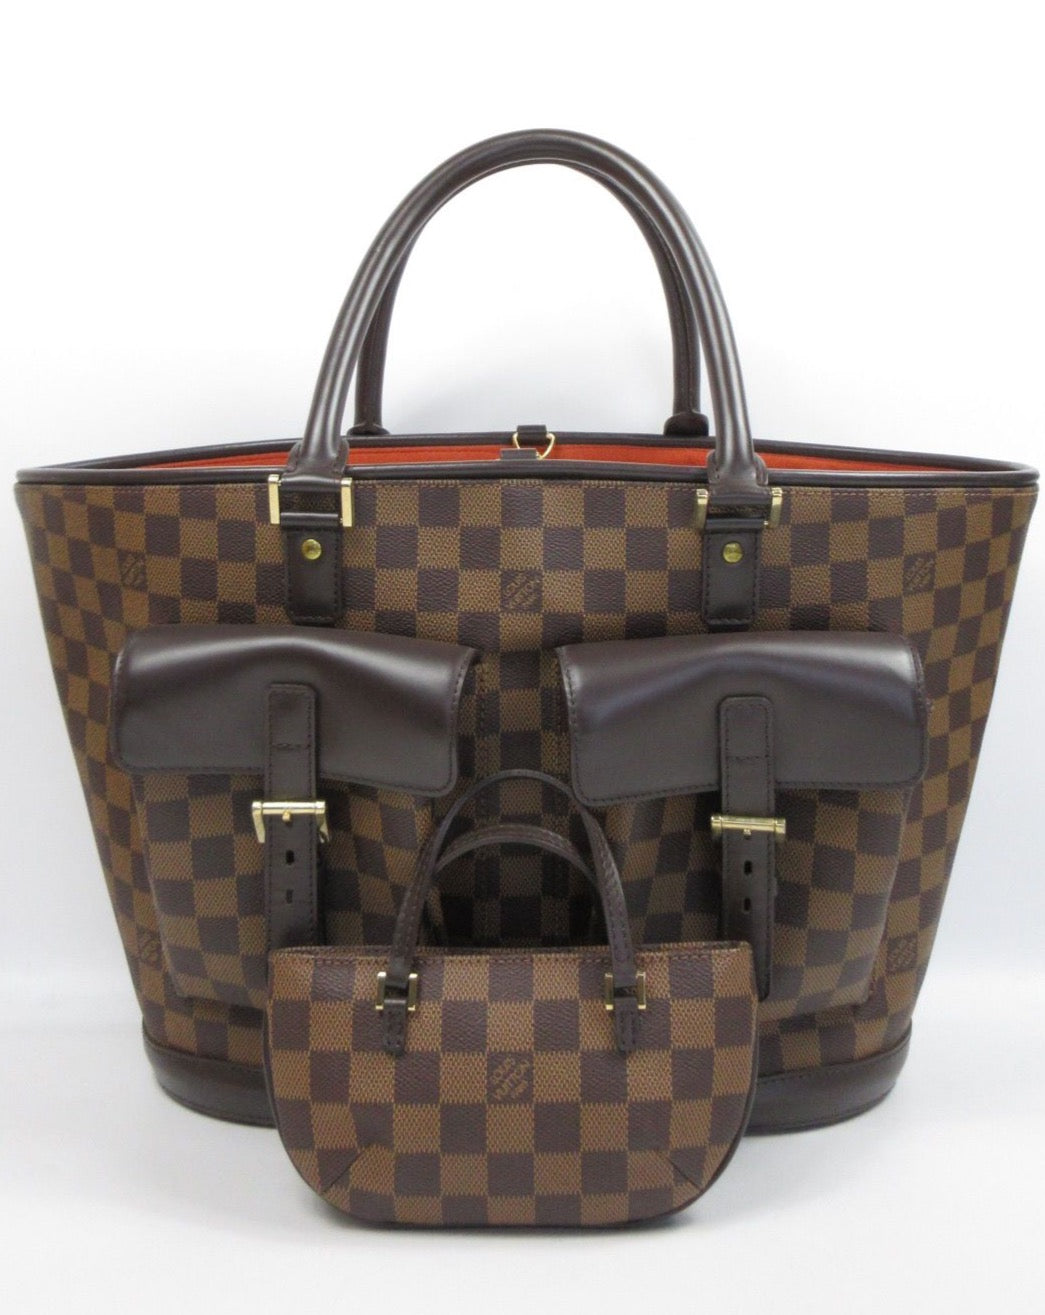 Preloved Louis Vuitton bags at a fraction of the RRP  Dollar Dealers